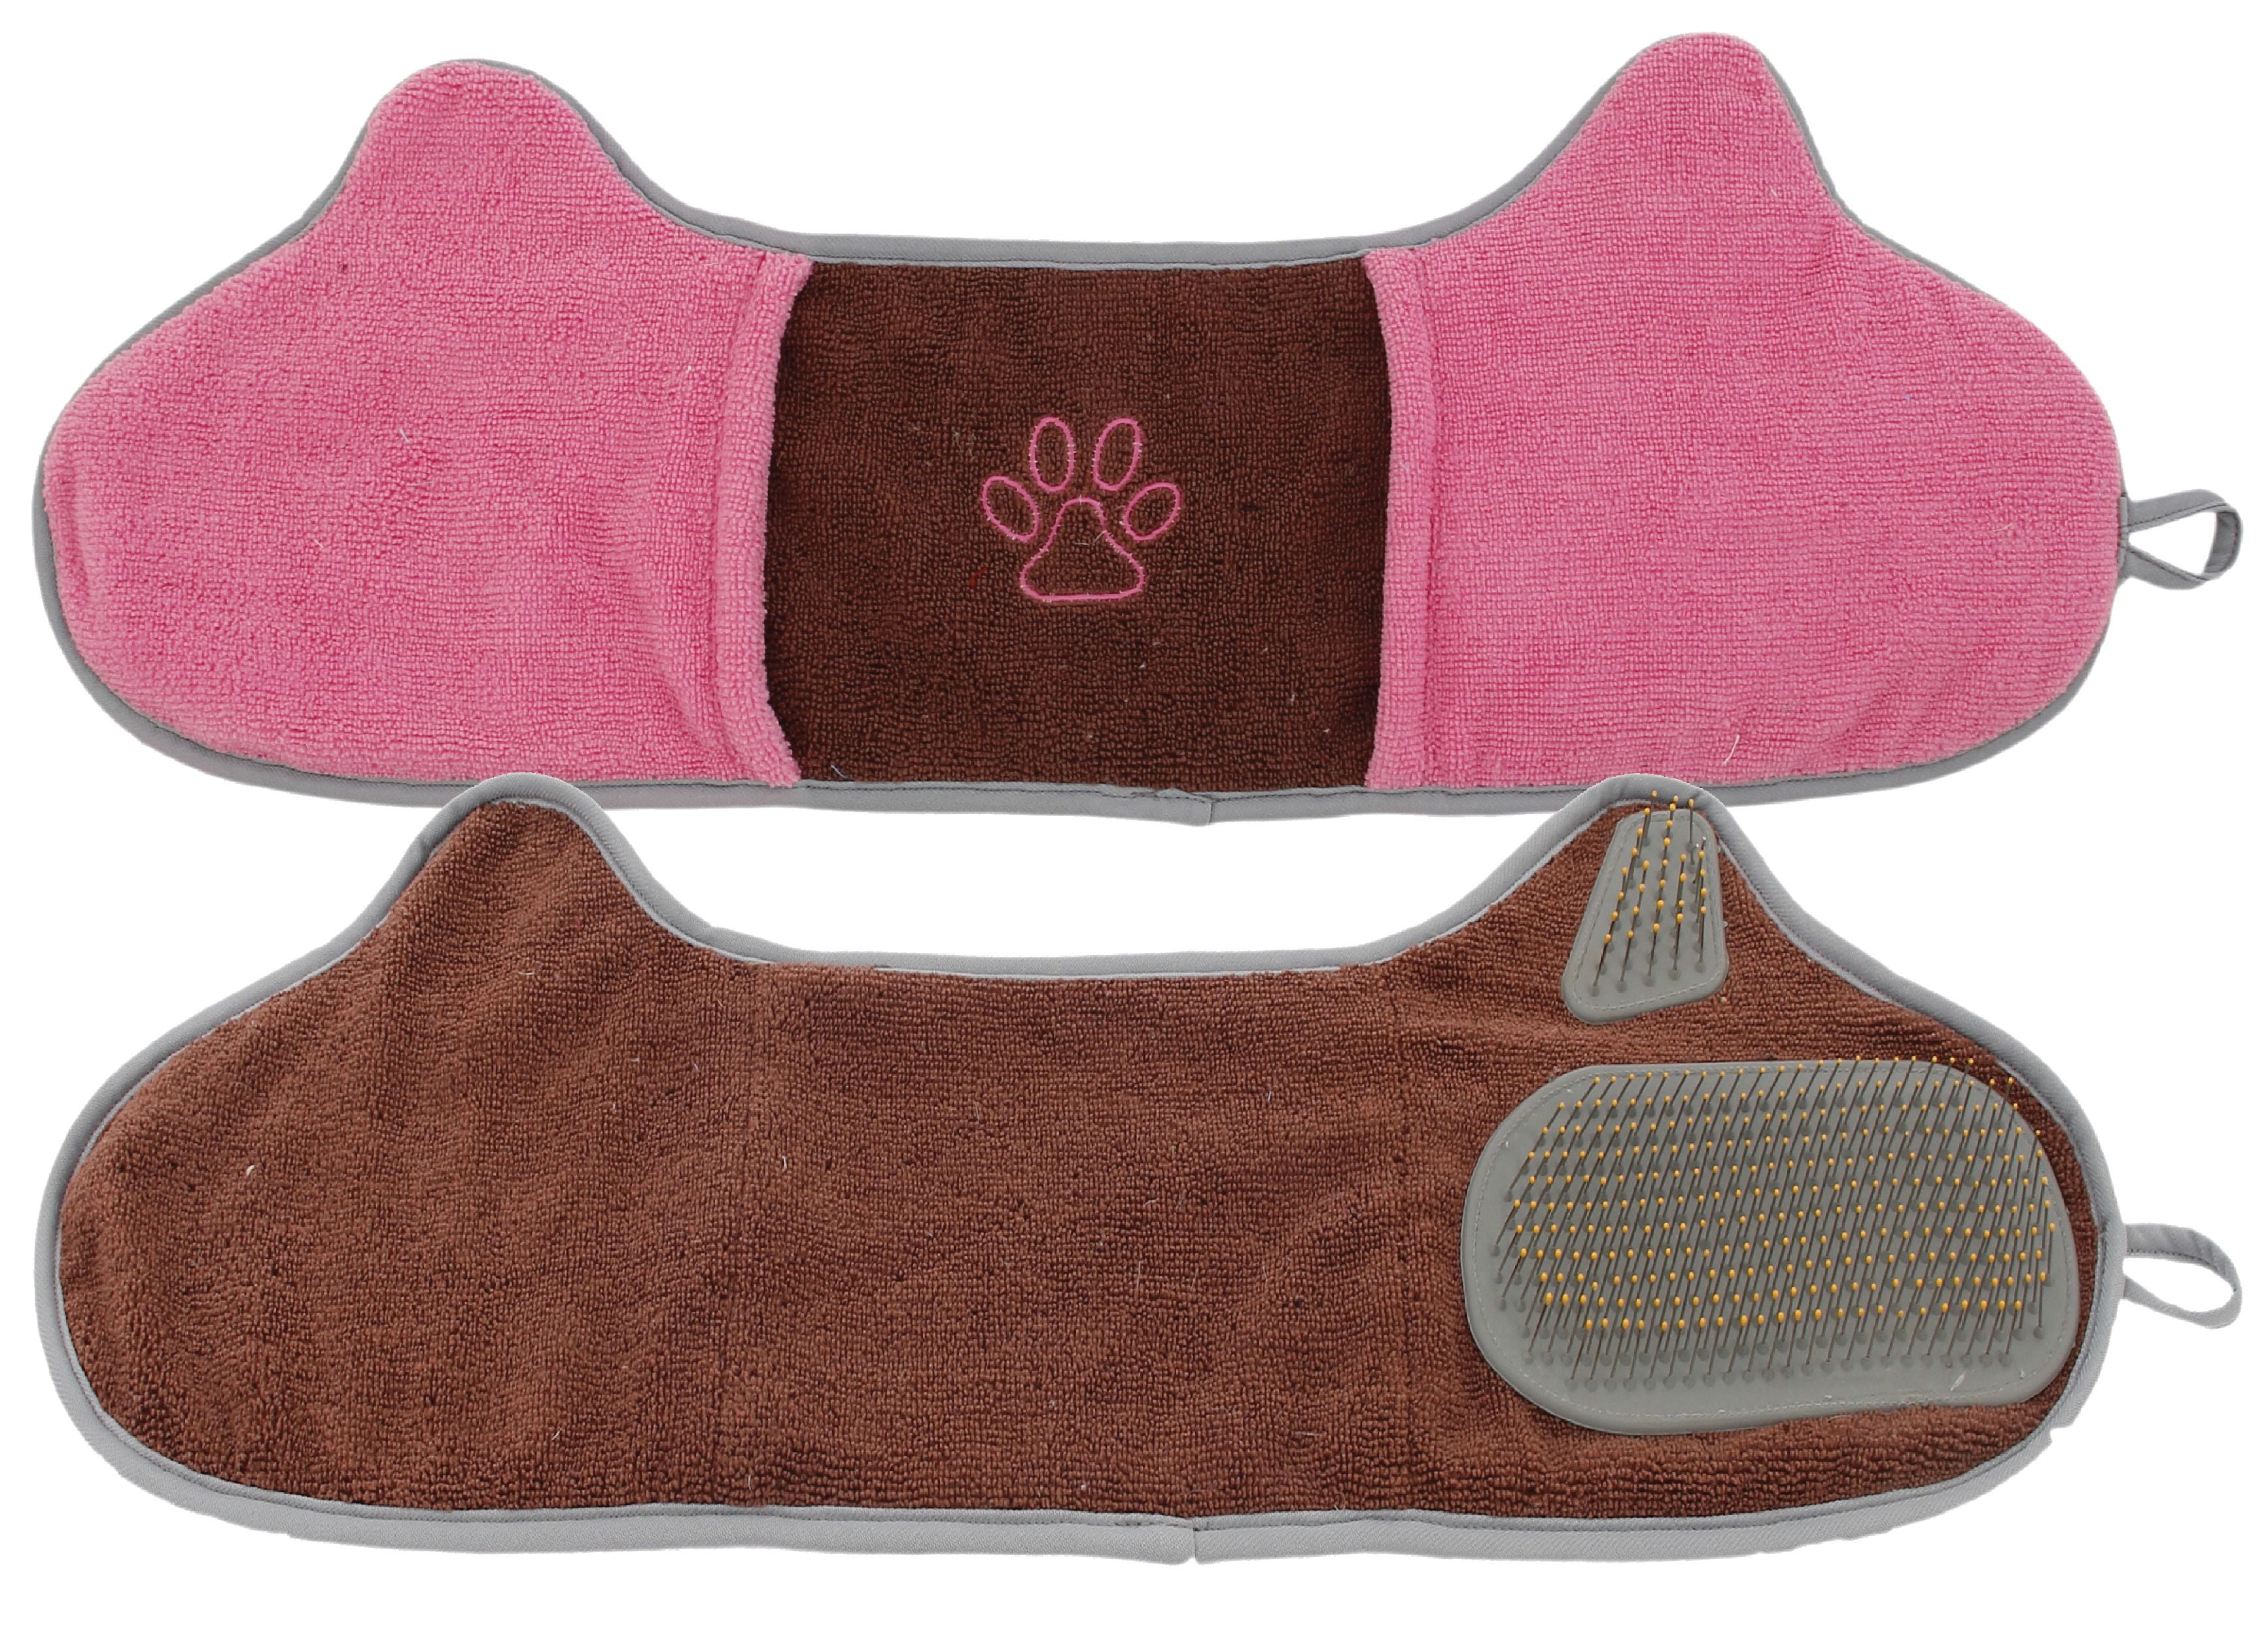 Pet Life ® 'Bryer' 2-in-1 Hand-Inserted Microfiber Pet Grooming Towel And Brush - One Size - Brown / Pink